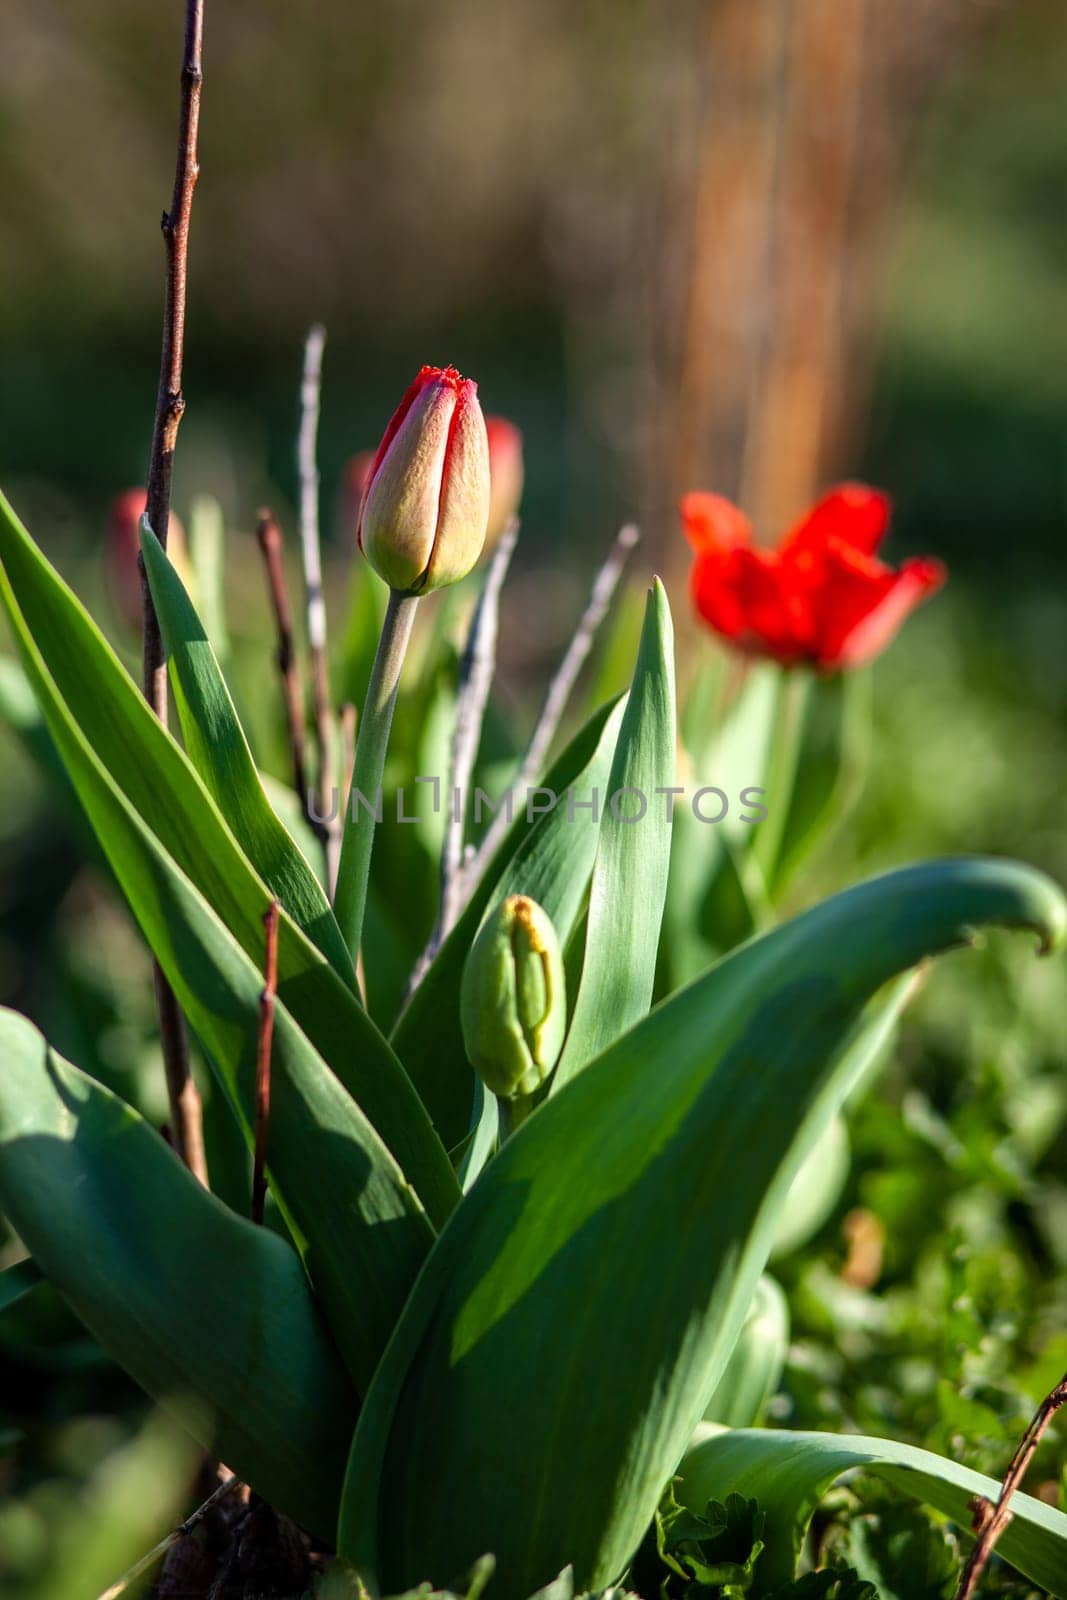 Flowerbed with beautiful blooming tulips in the garden. Spring vegetable garden and flowers.